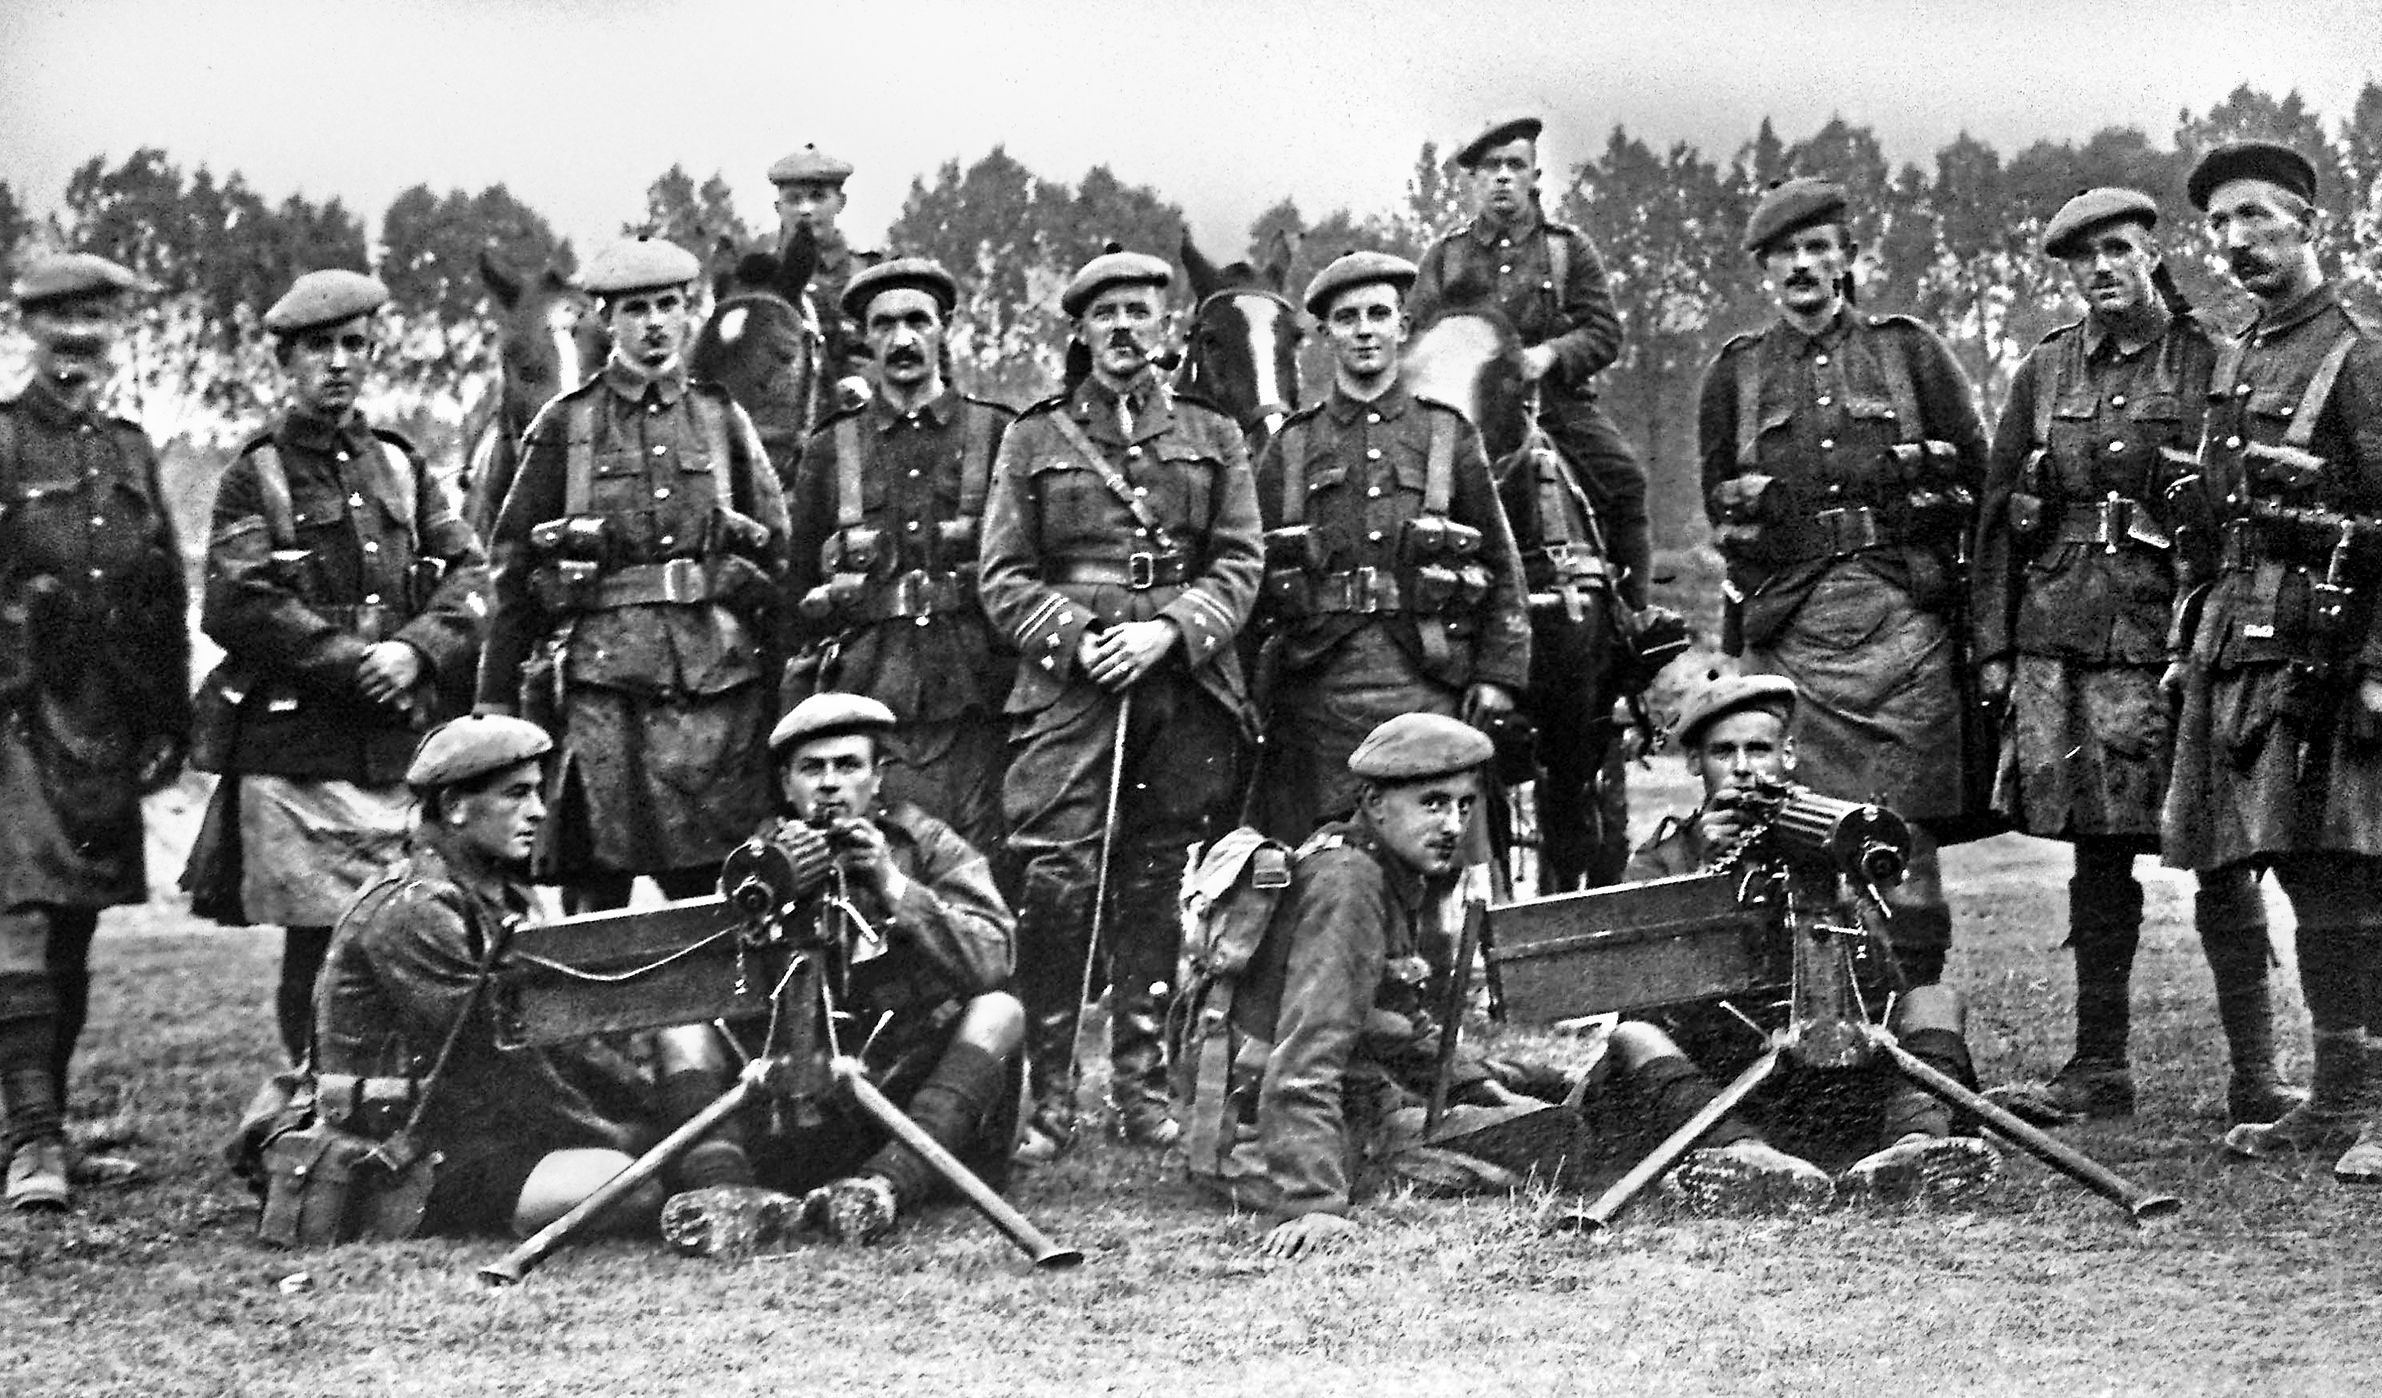 The famed Black Watch Regiment, with kilted machine gunners from the city of Dundee, Scotland, suffered more than 50 percent casualities at the Battle of Loos.